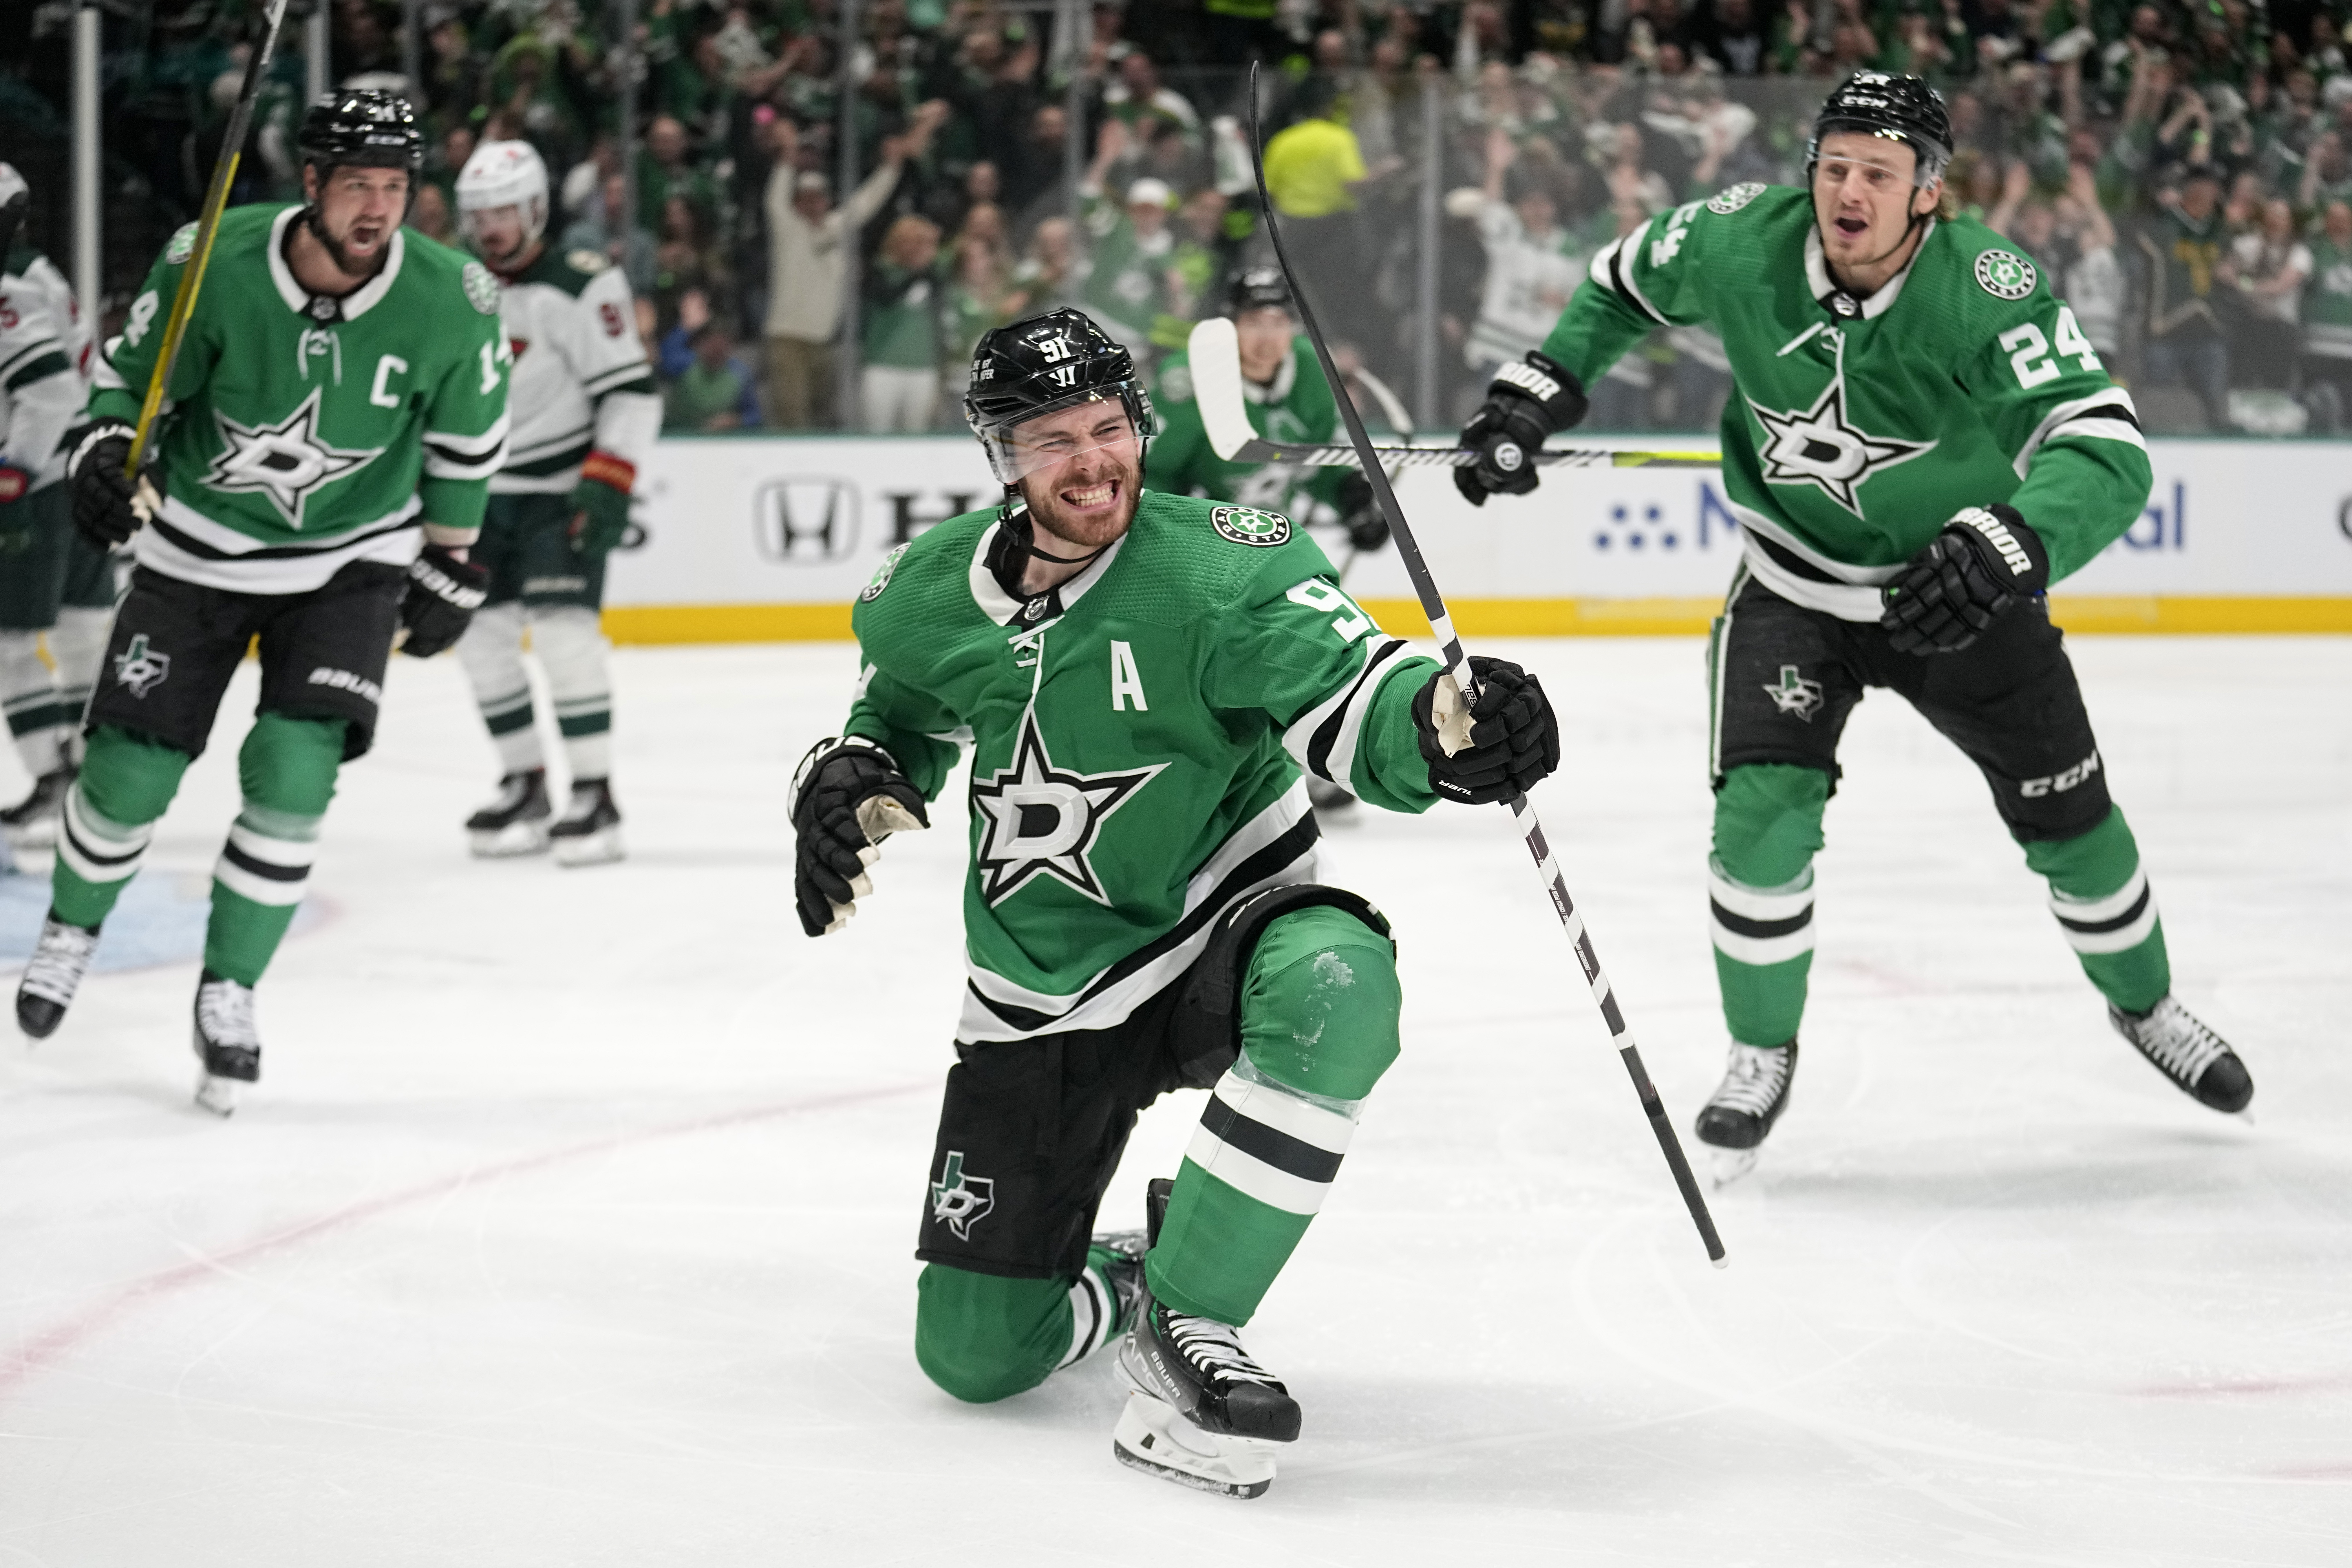 Stars-Wild in NHL playoffs with top rookies from 2 years ago